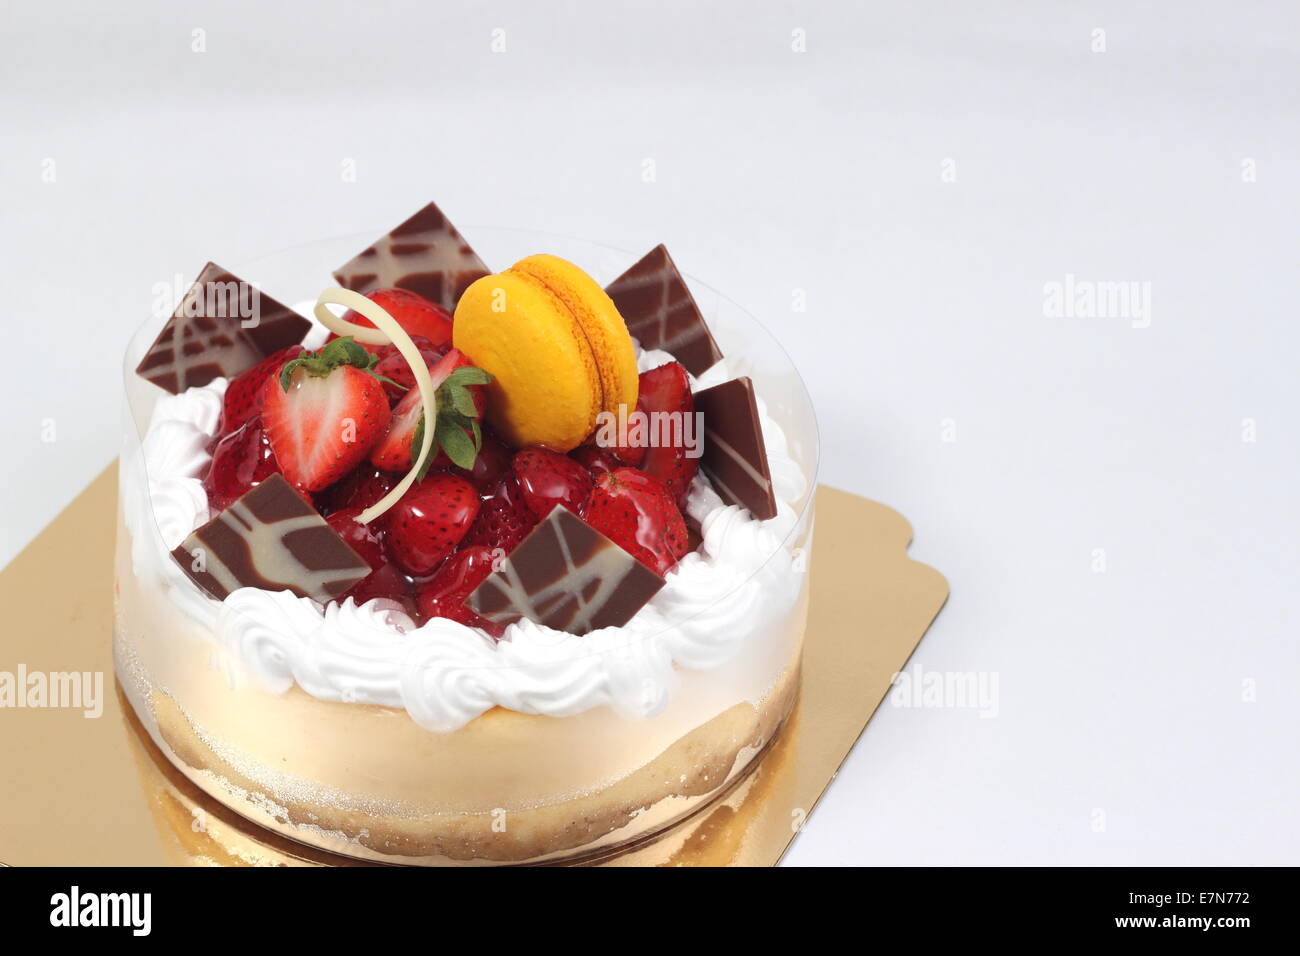 Delicious cheese cake with strawberry fruit toping. Stock Photo